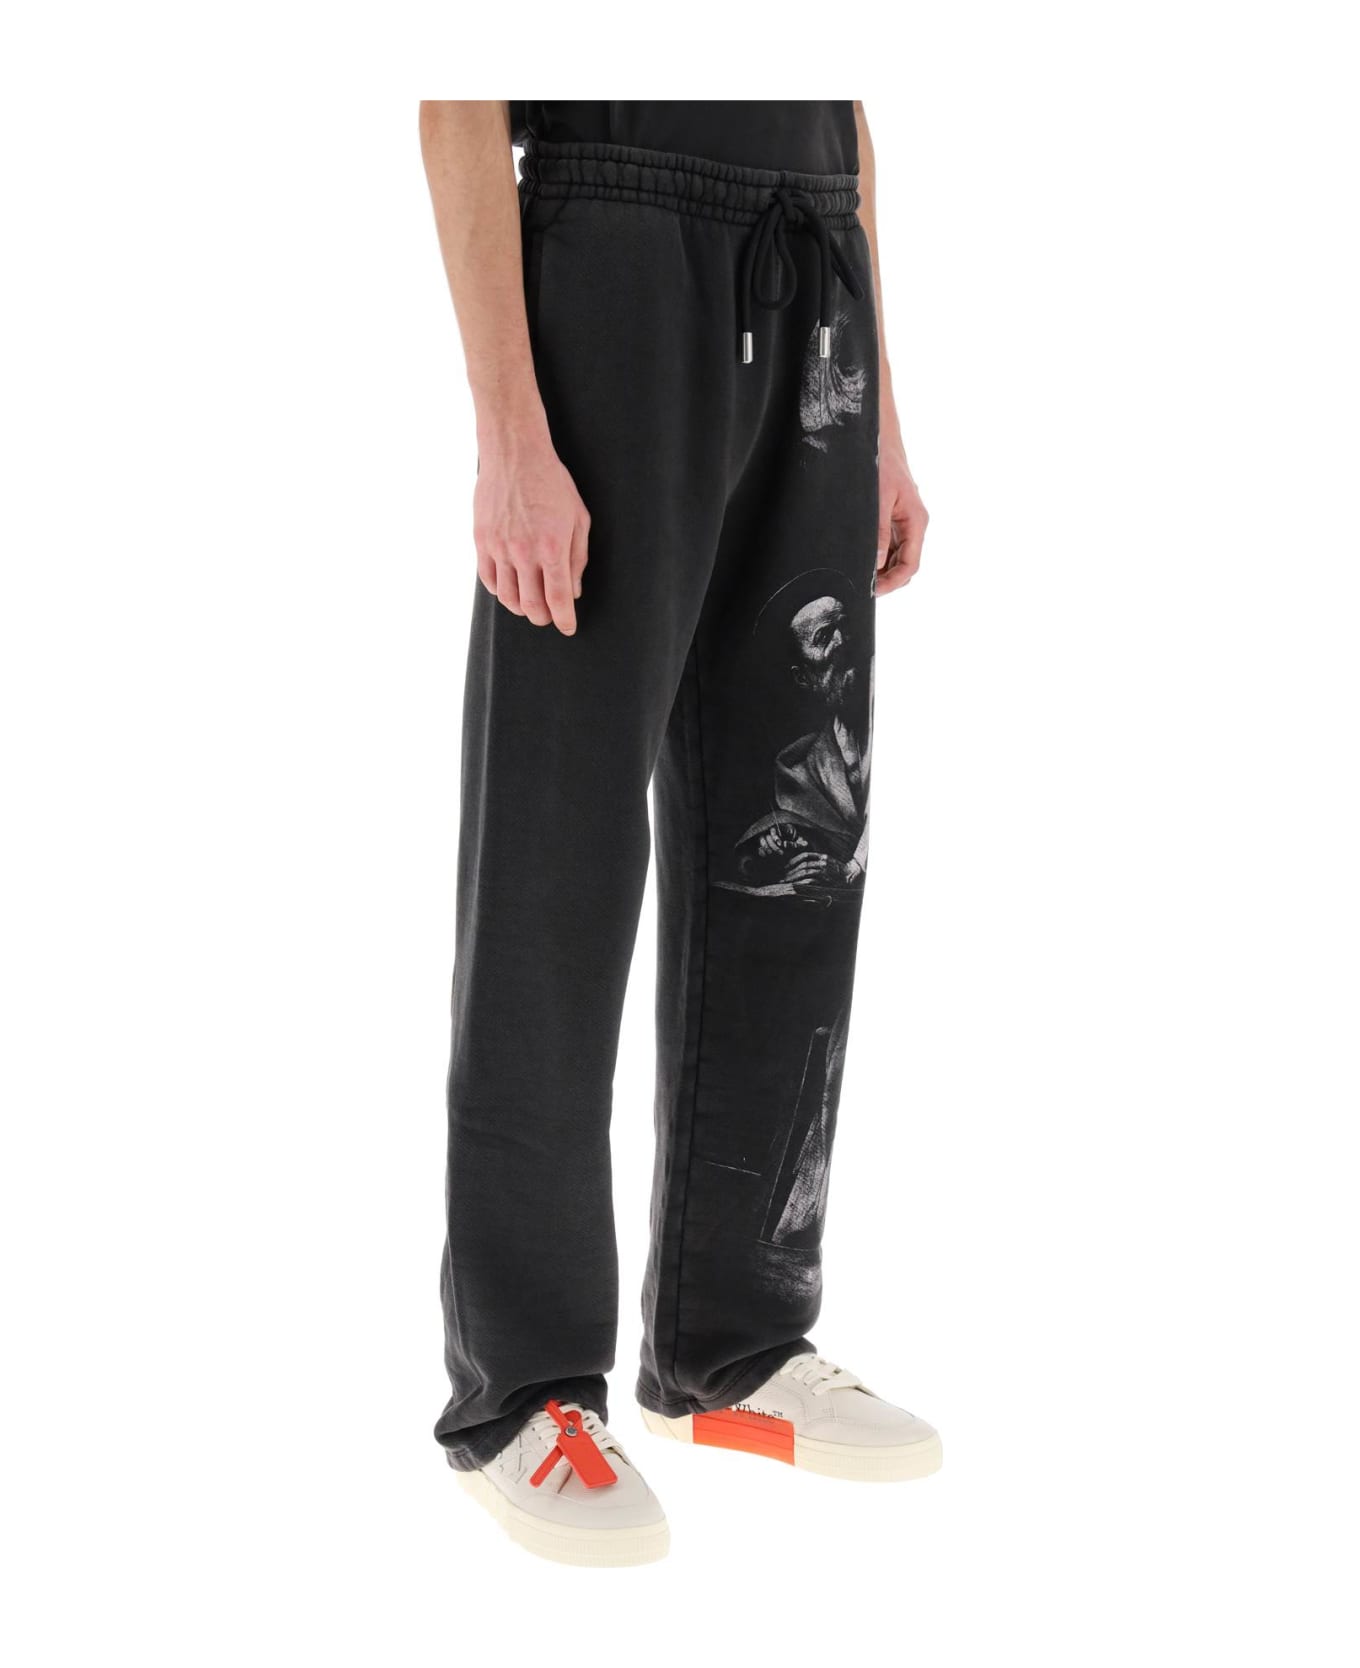 Off-White Pants With Drawstring And Graphic Print - BLACK GREY (Grey) スウェットパンツ